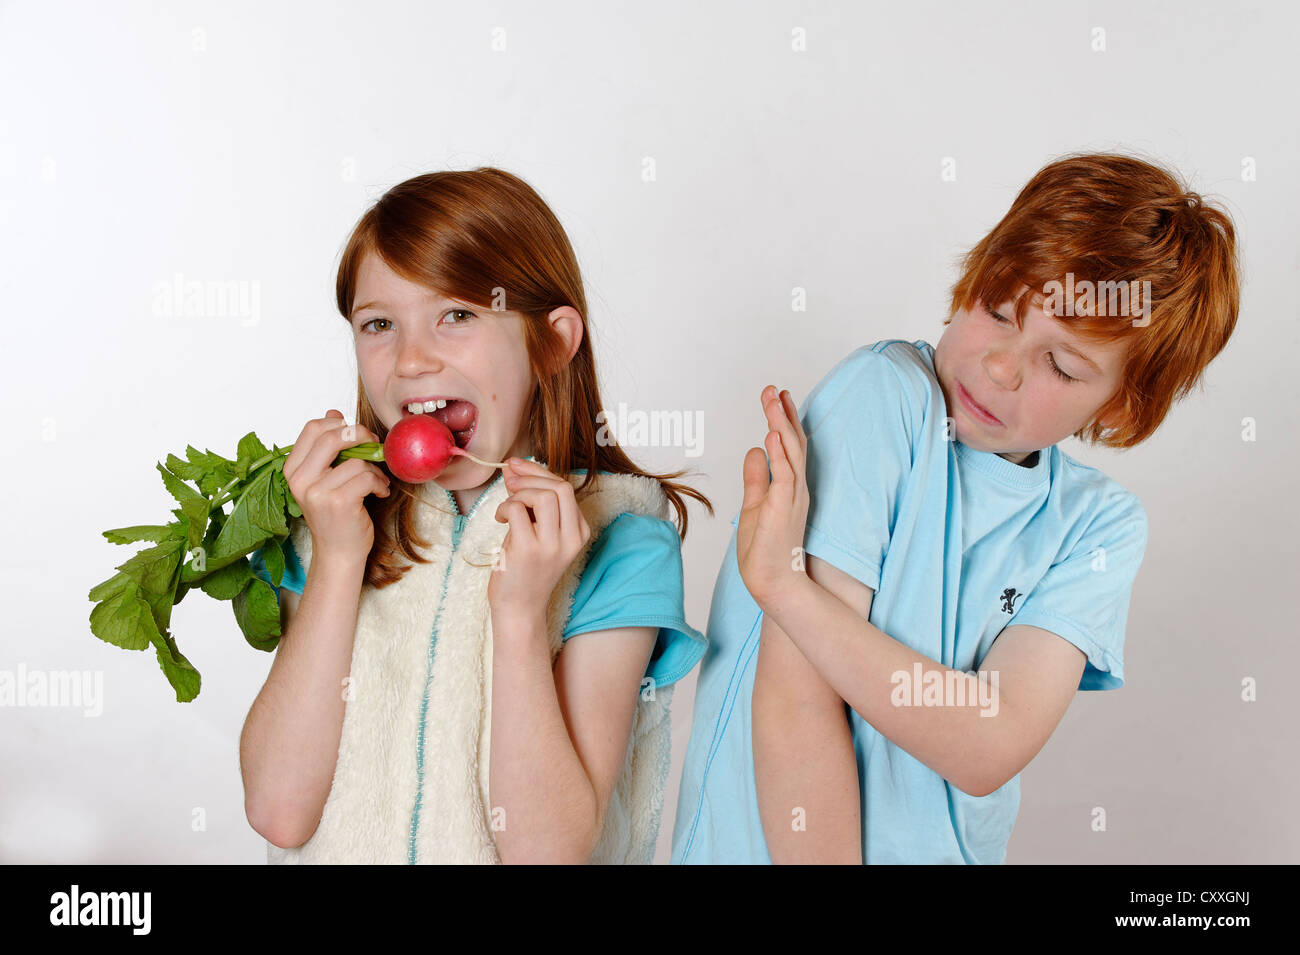 Girl eating radishes, boy rejecting raw food or vegetables Stock Photo